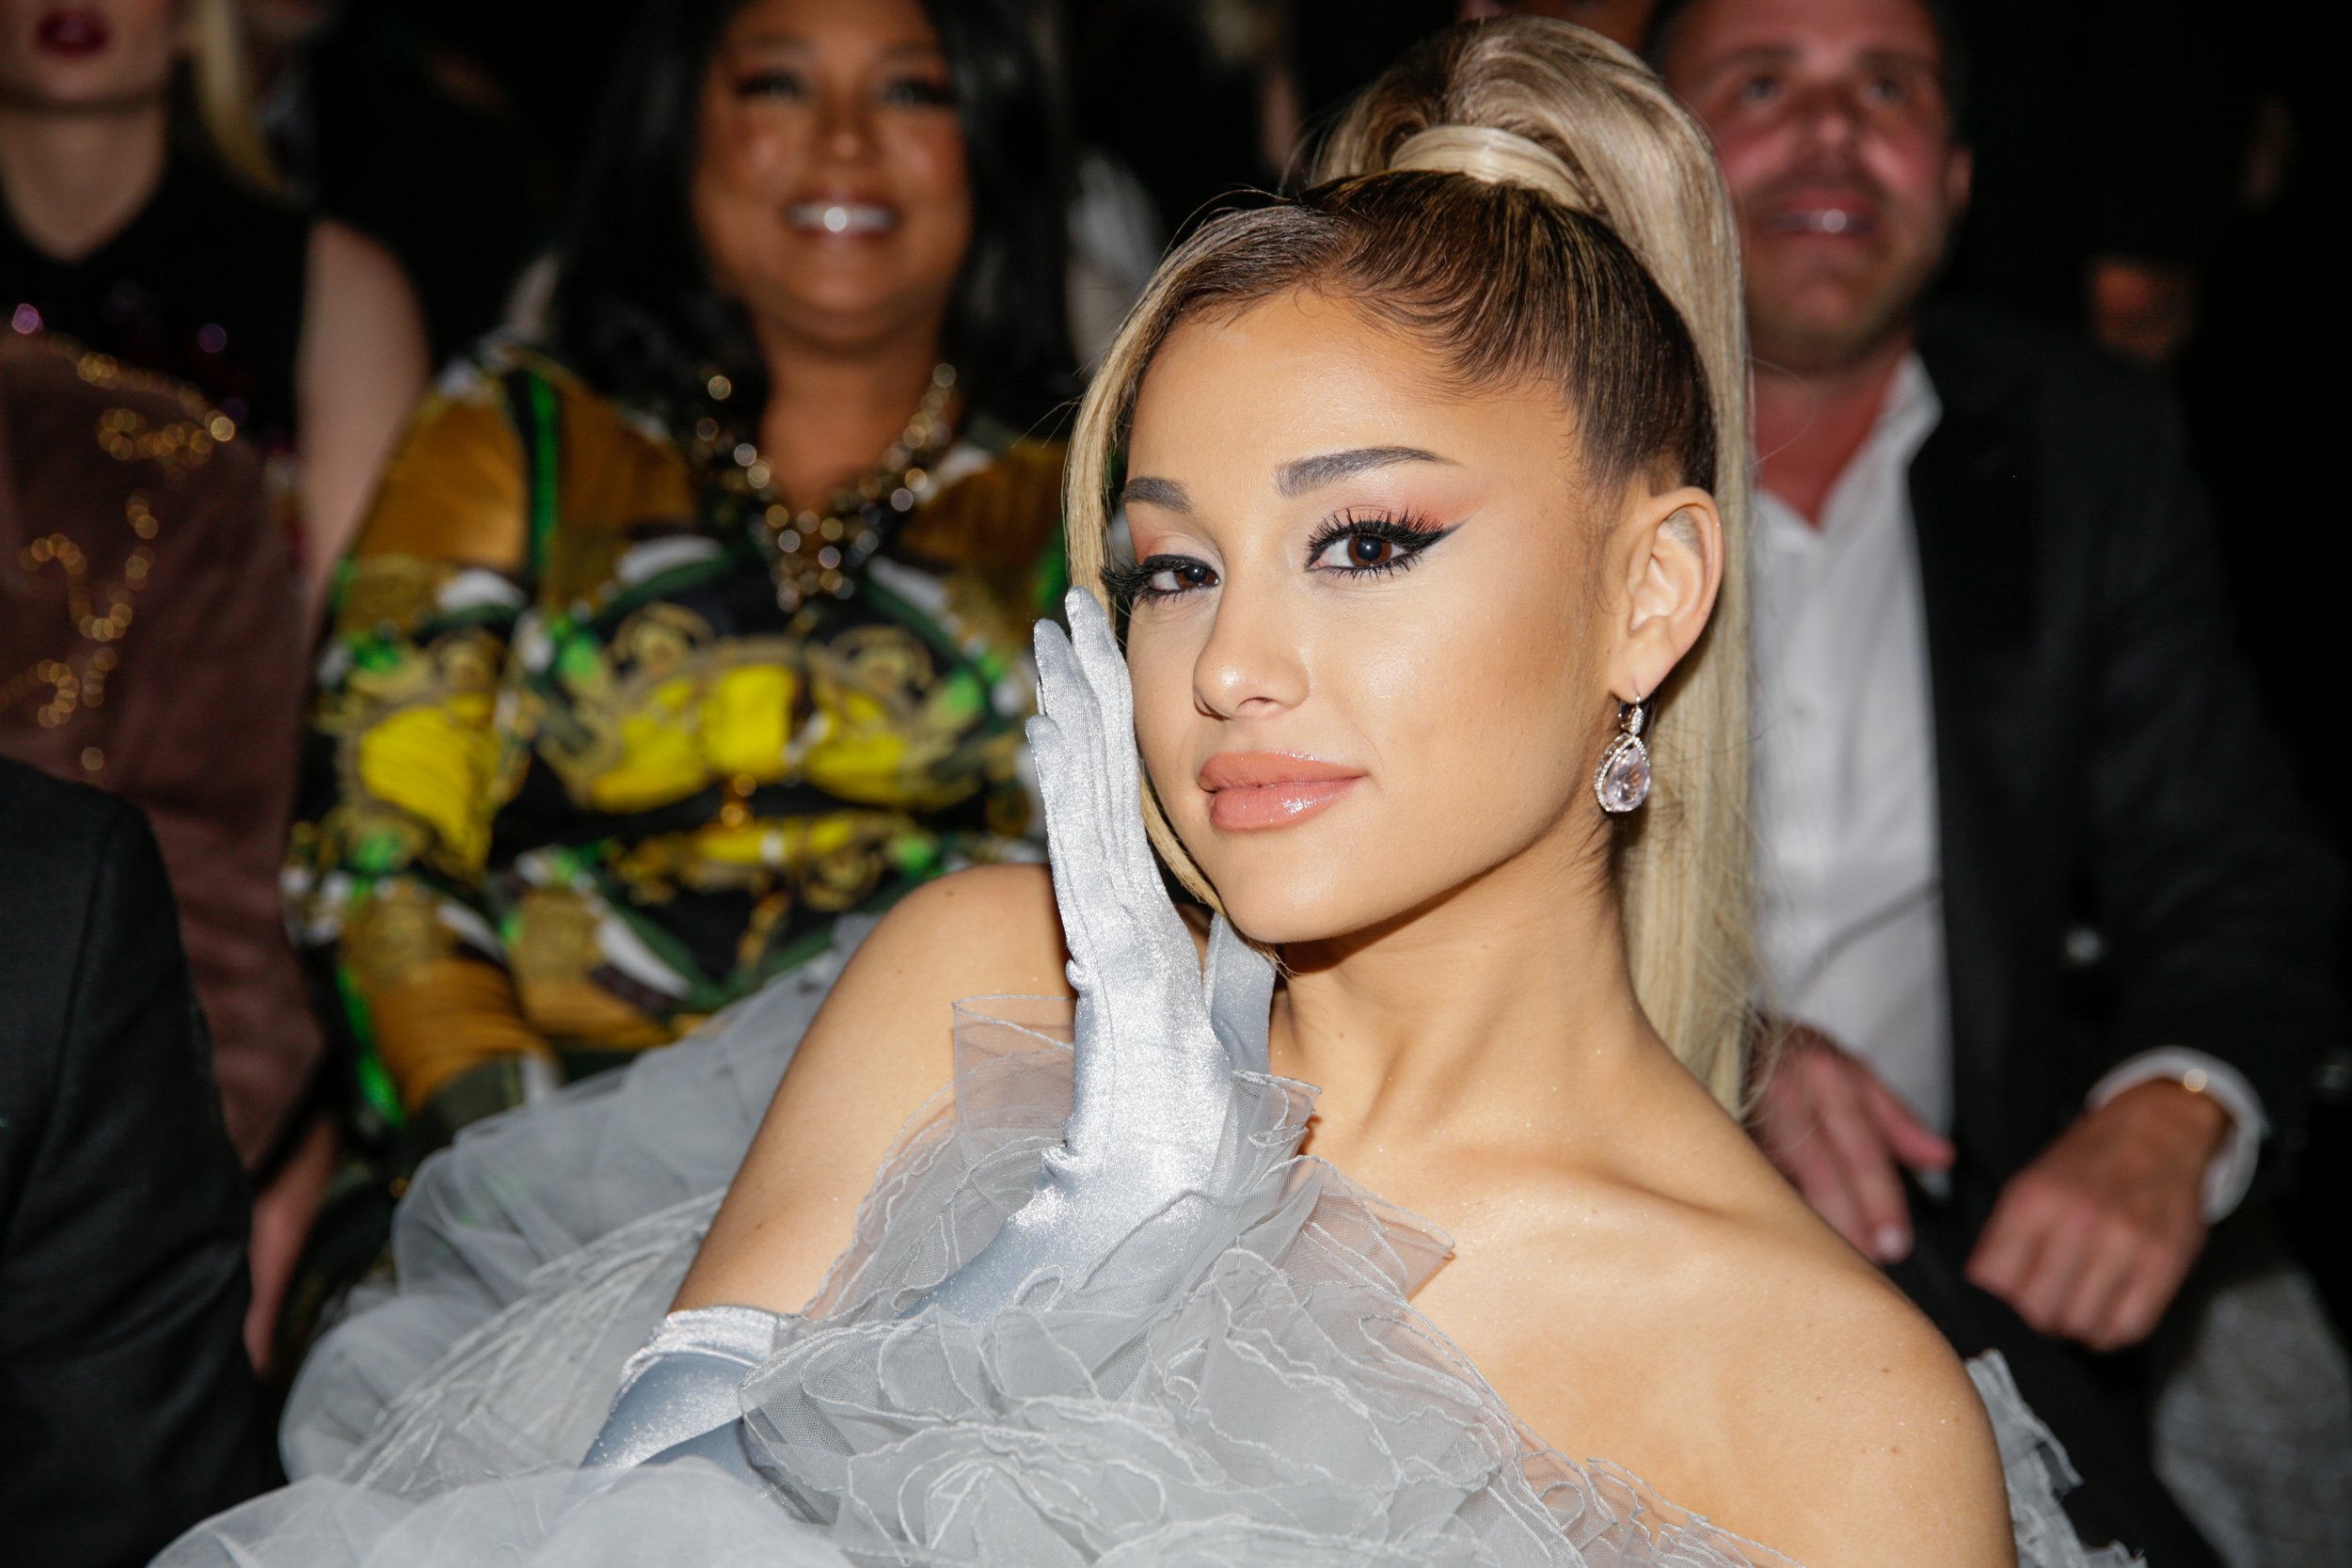 Ariana Grande Just Slammed Tiktokers For Partying During The Pandemic And They Definitely Feel 